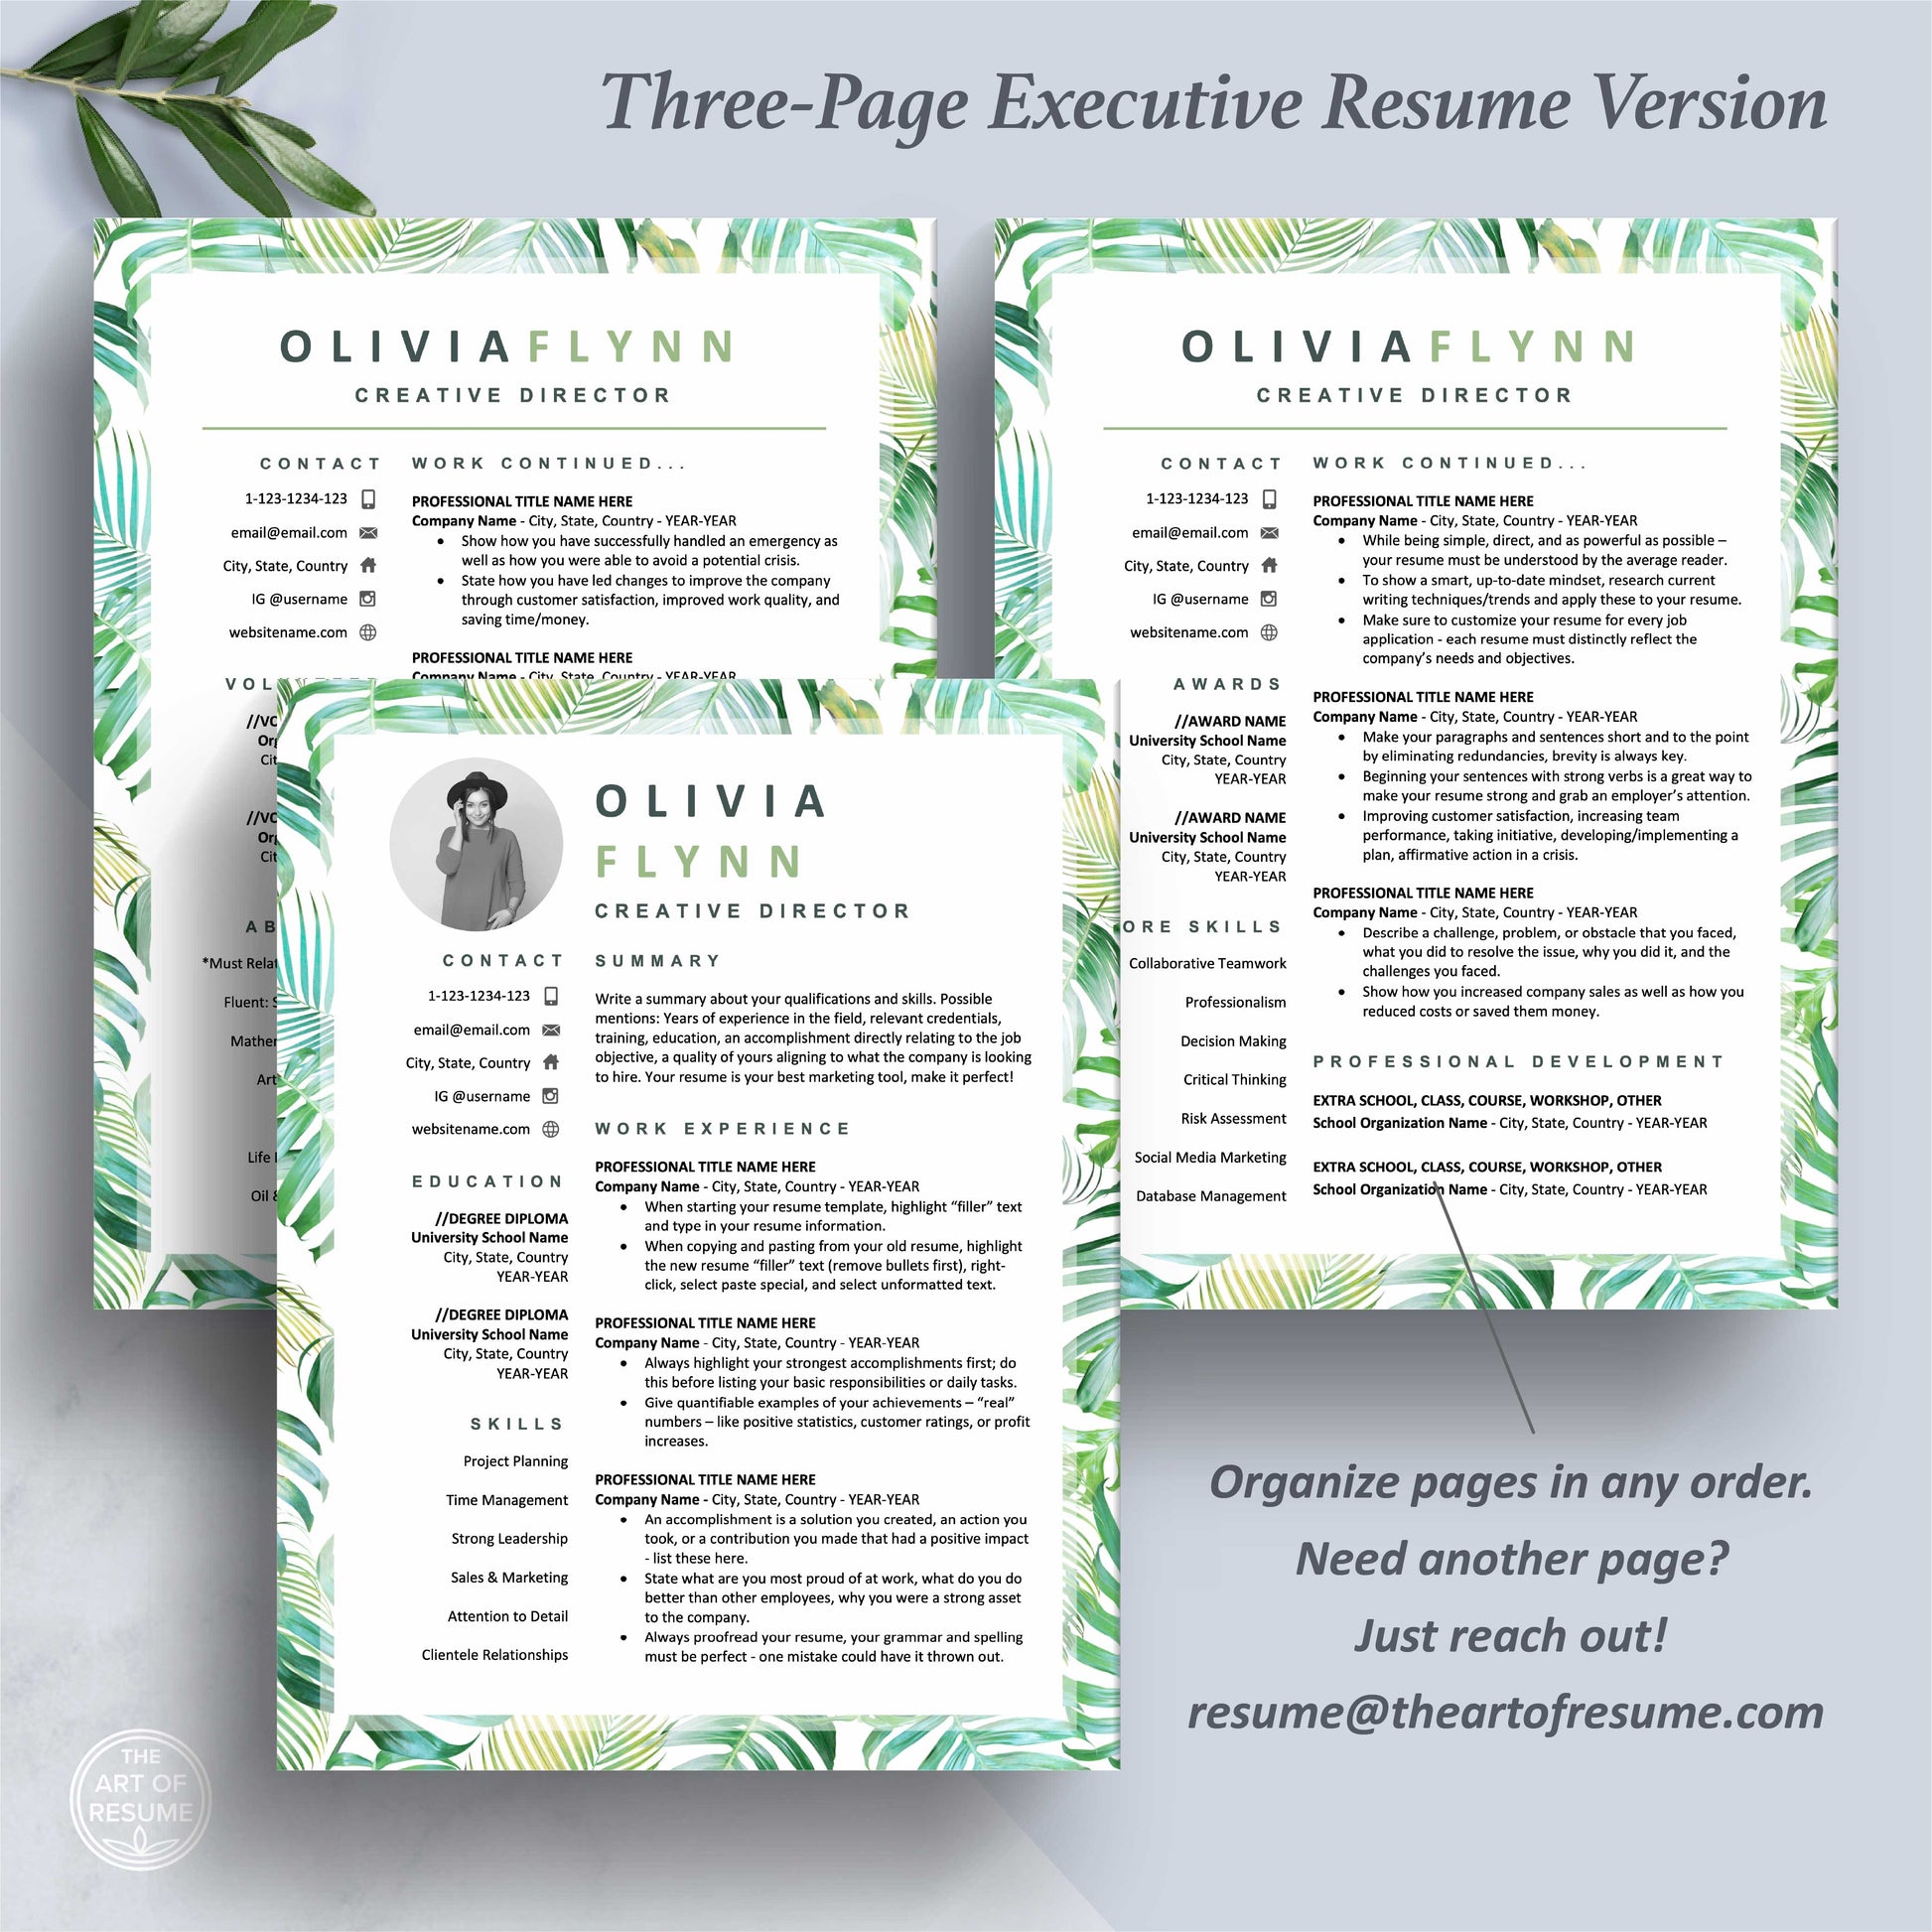 The Art of Resume Templates | Three-Page Creative Tropical Green  Executive CEO C-Suite Level  Resume CV Template Format | Curriculum Vitae